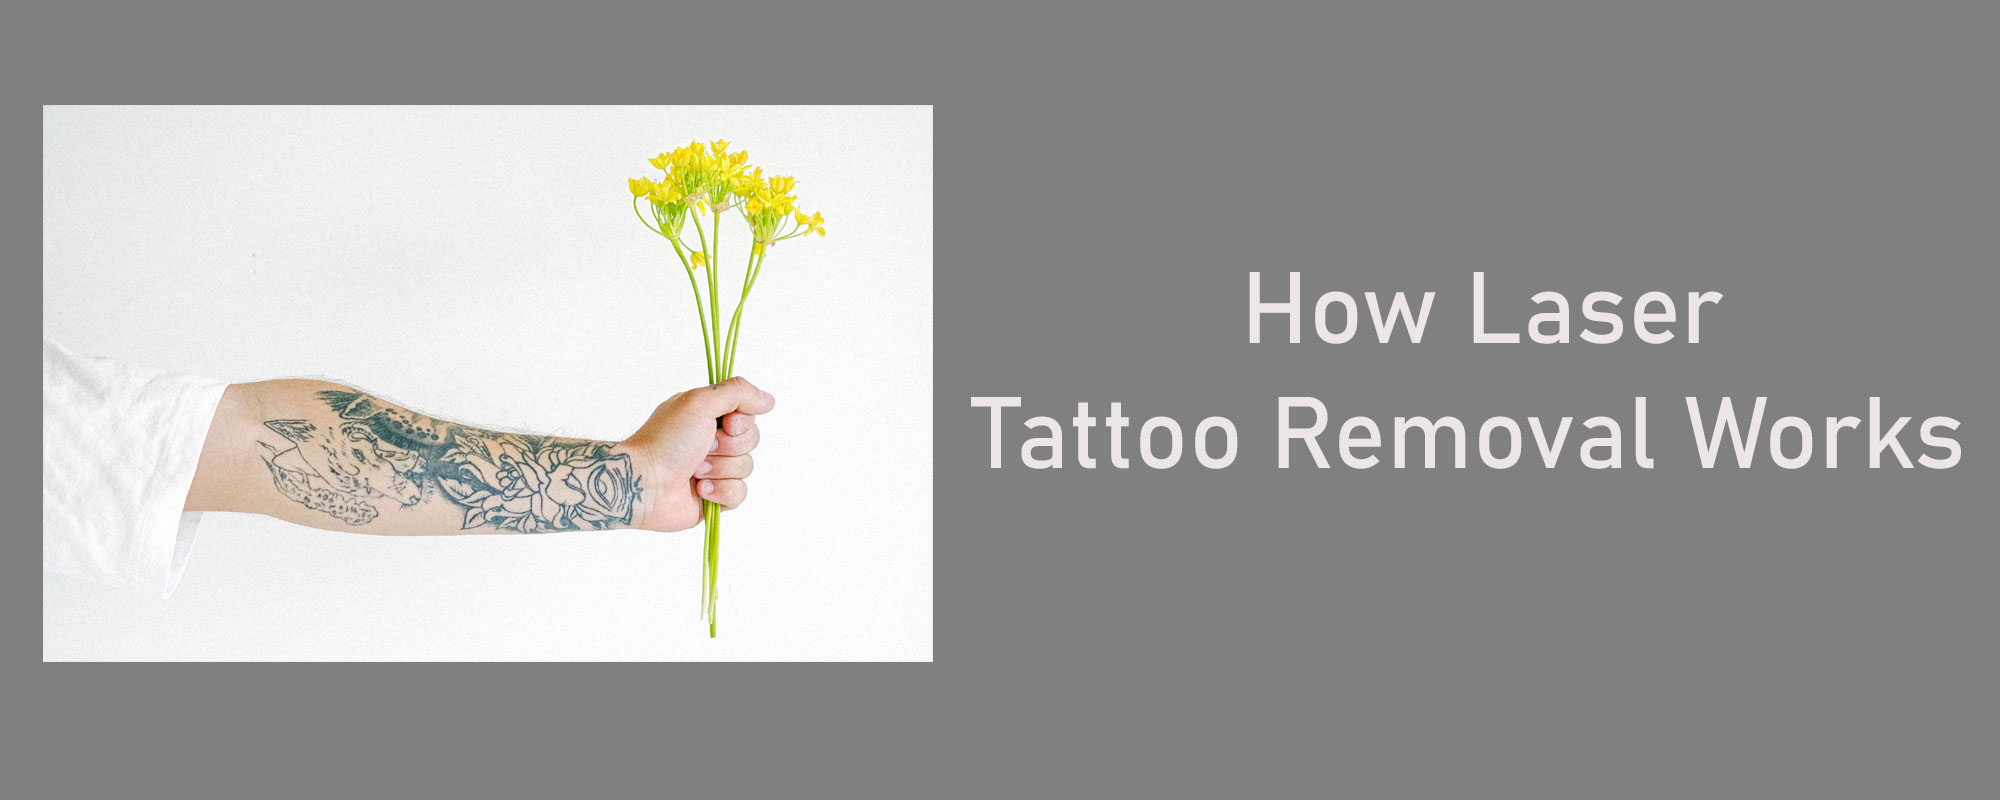 How Laser Tattoo Removal Works - 1